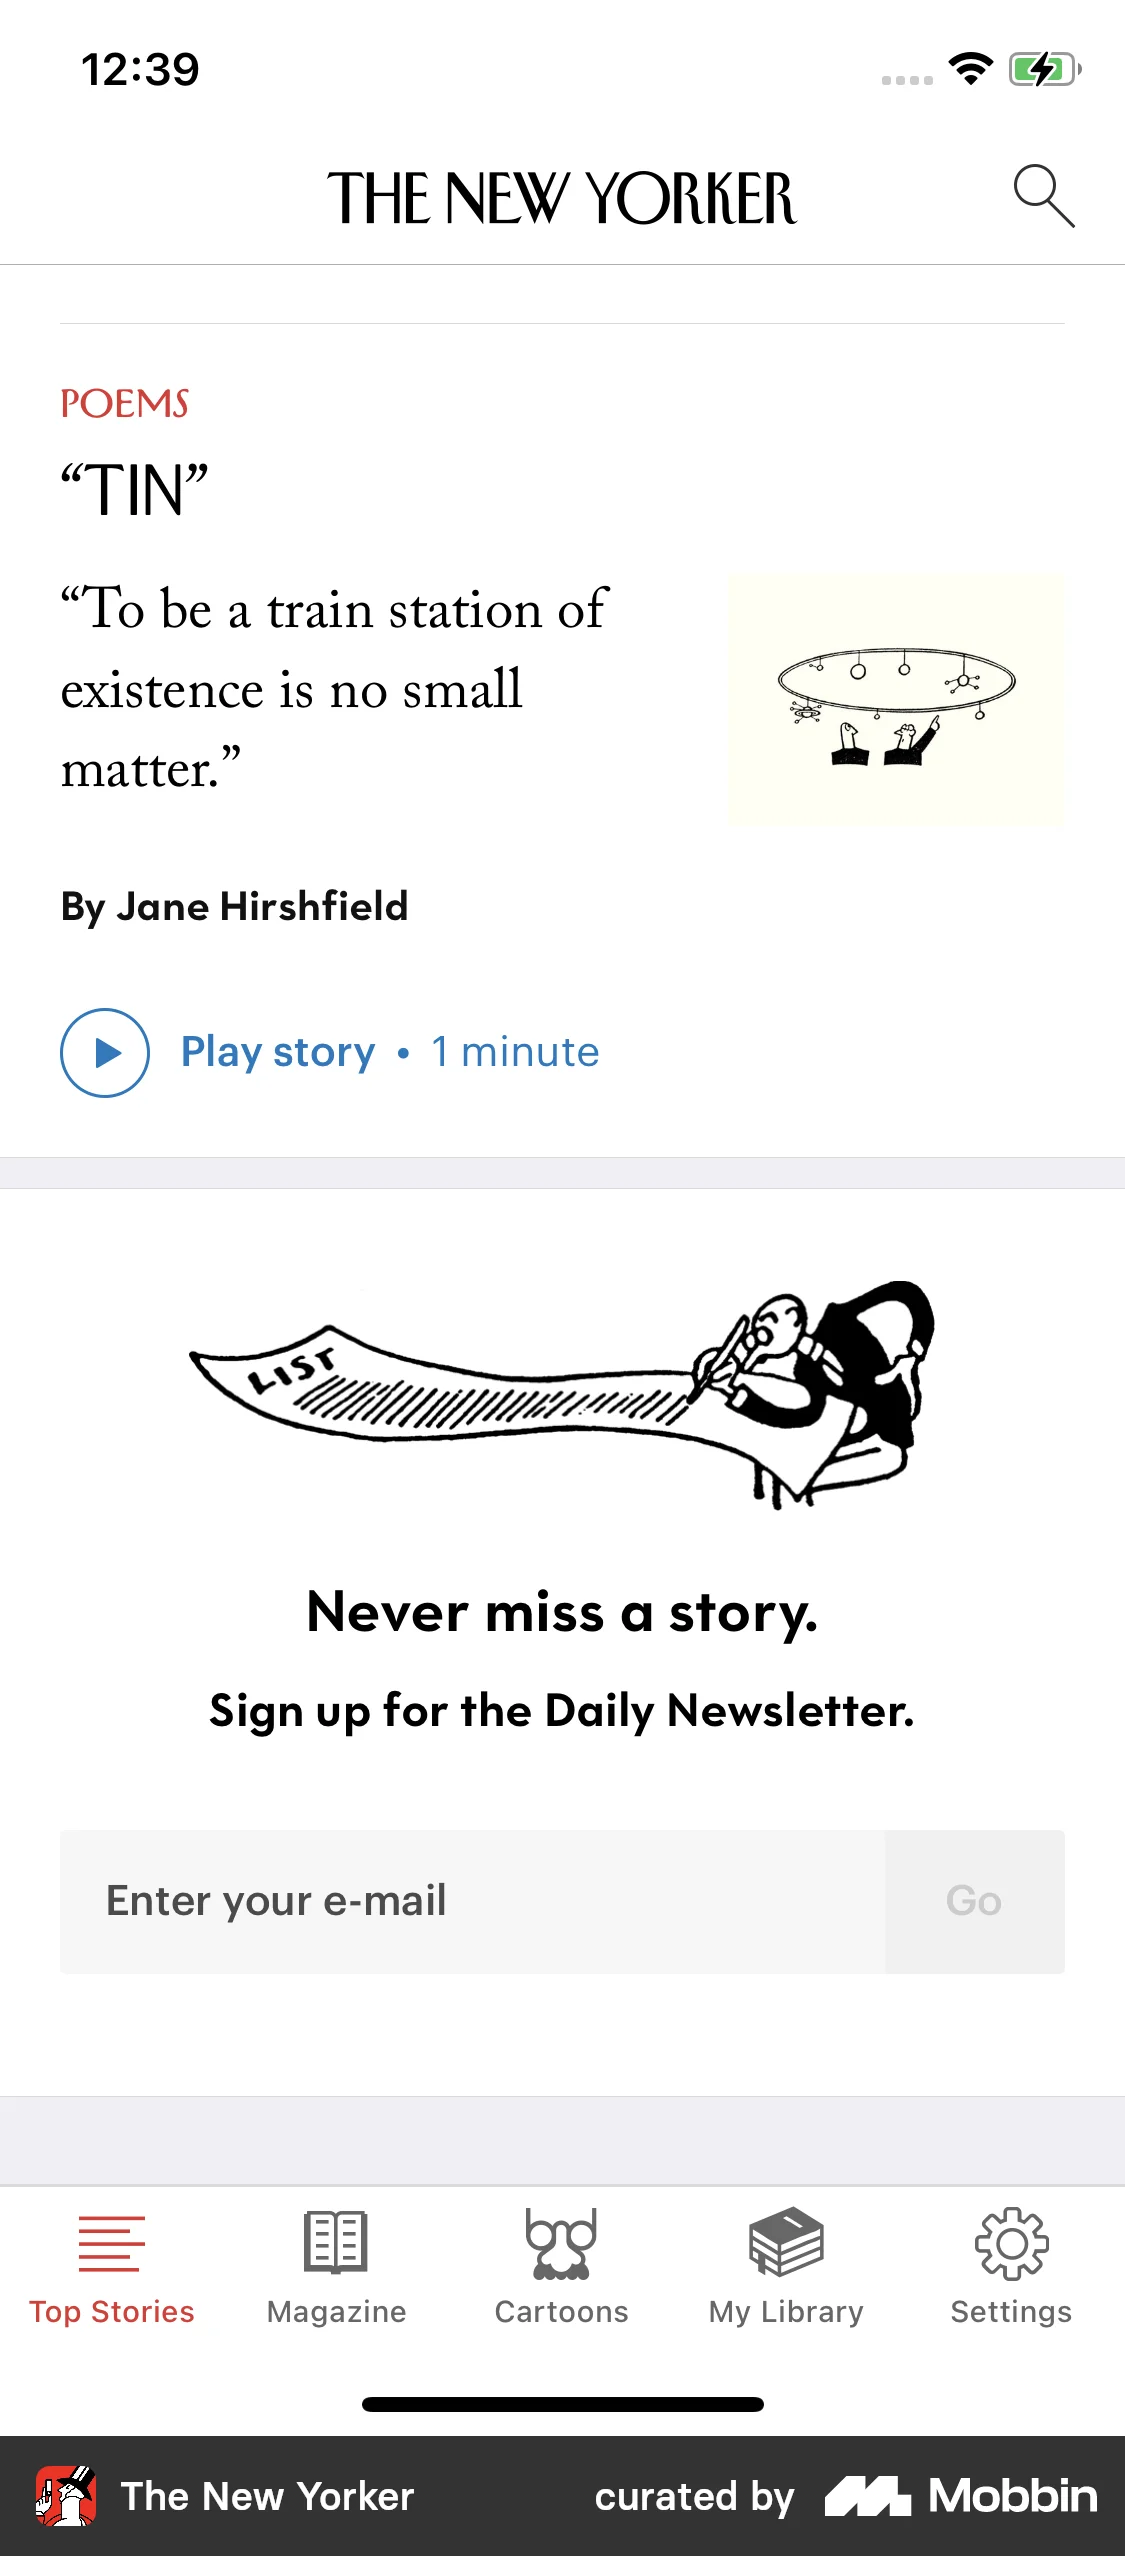 The New Yorker Top stories screen